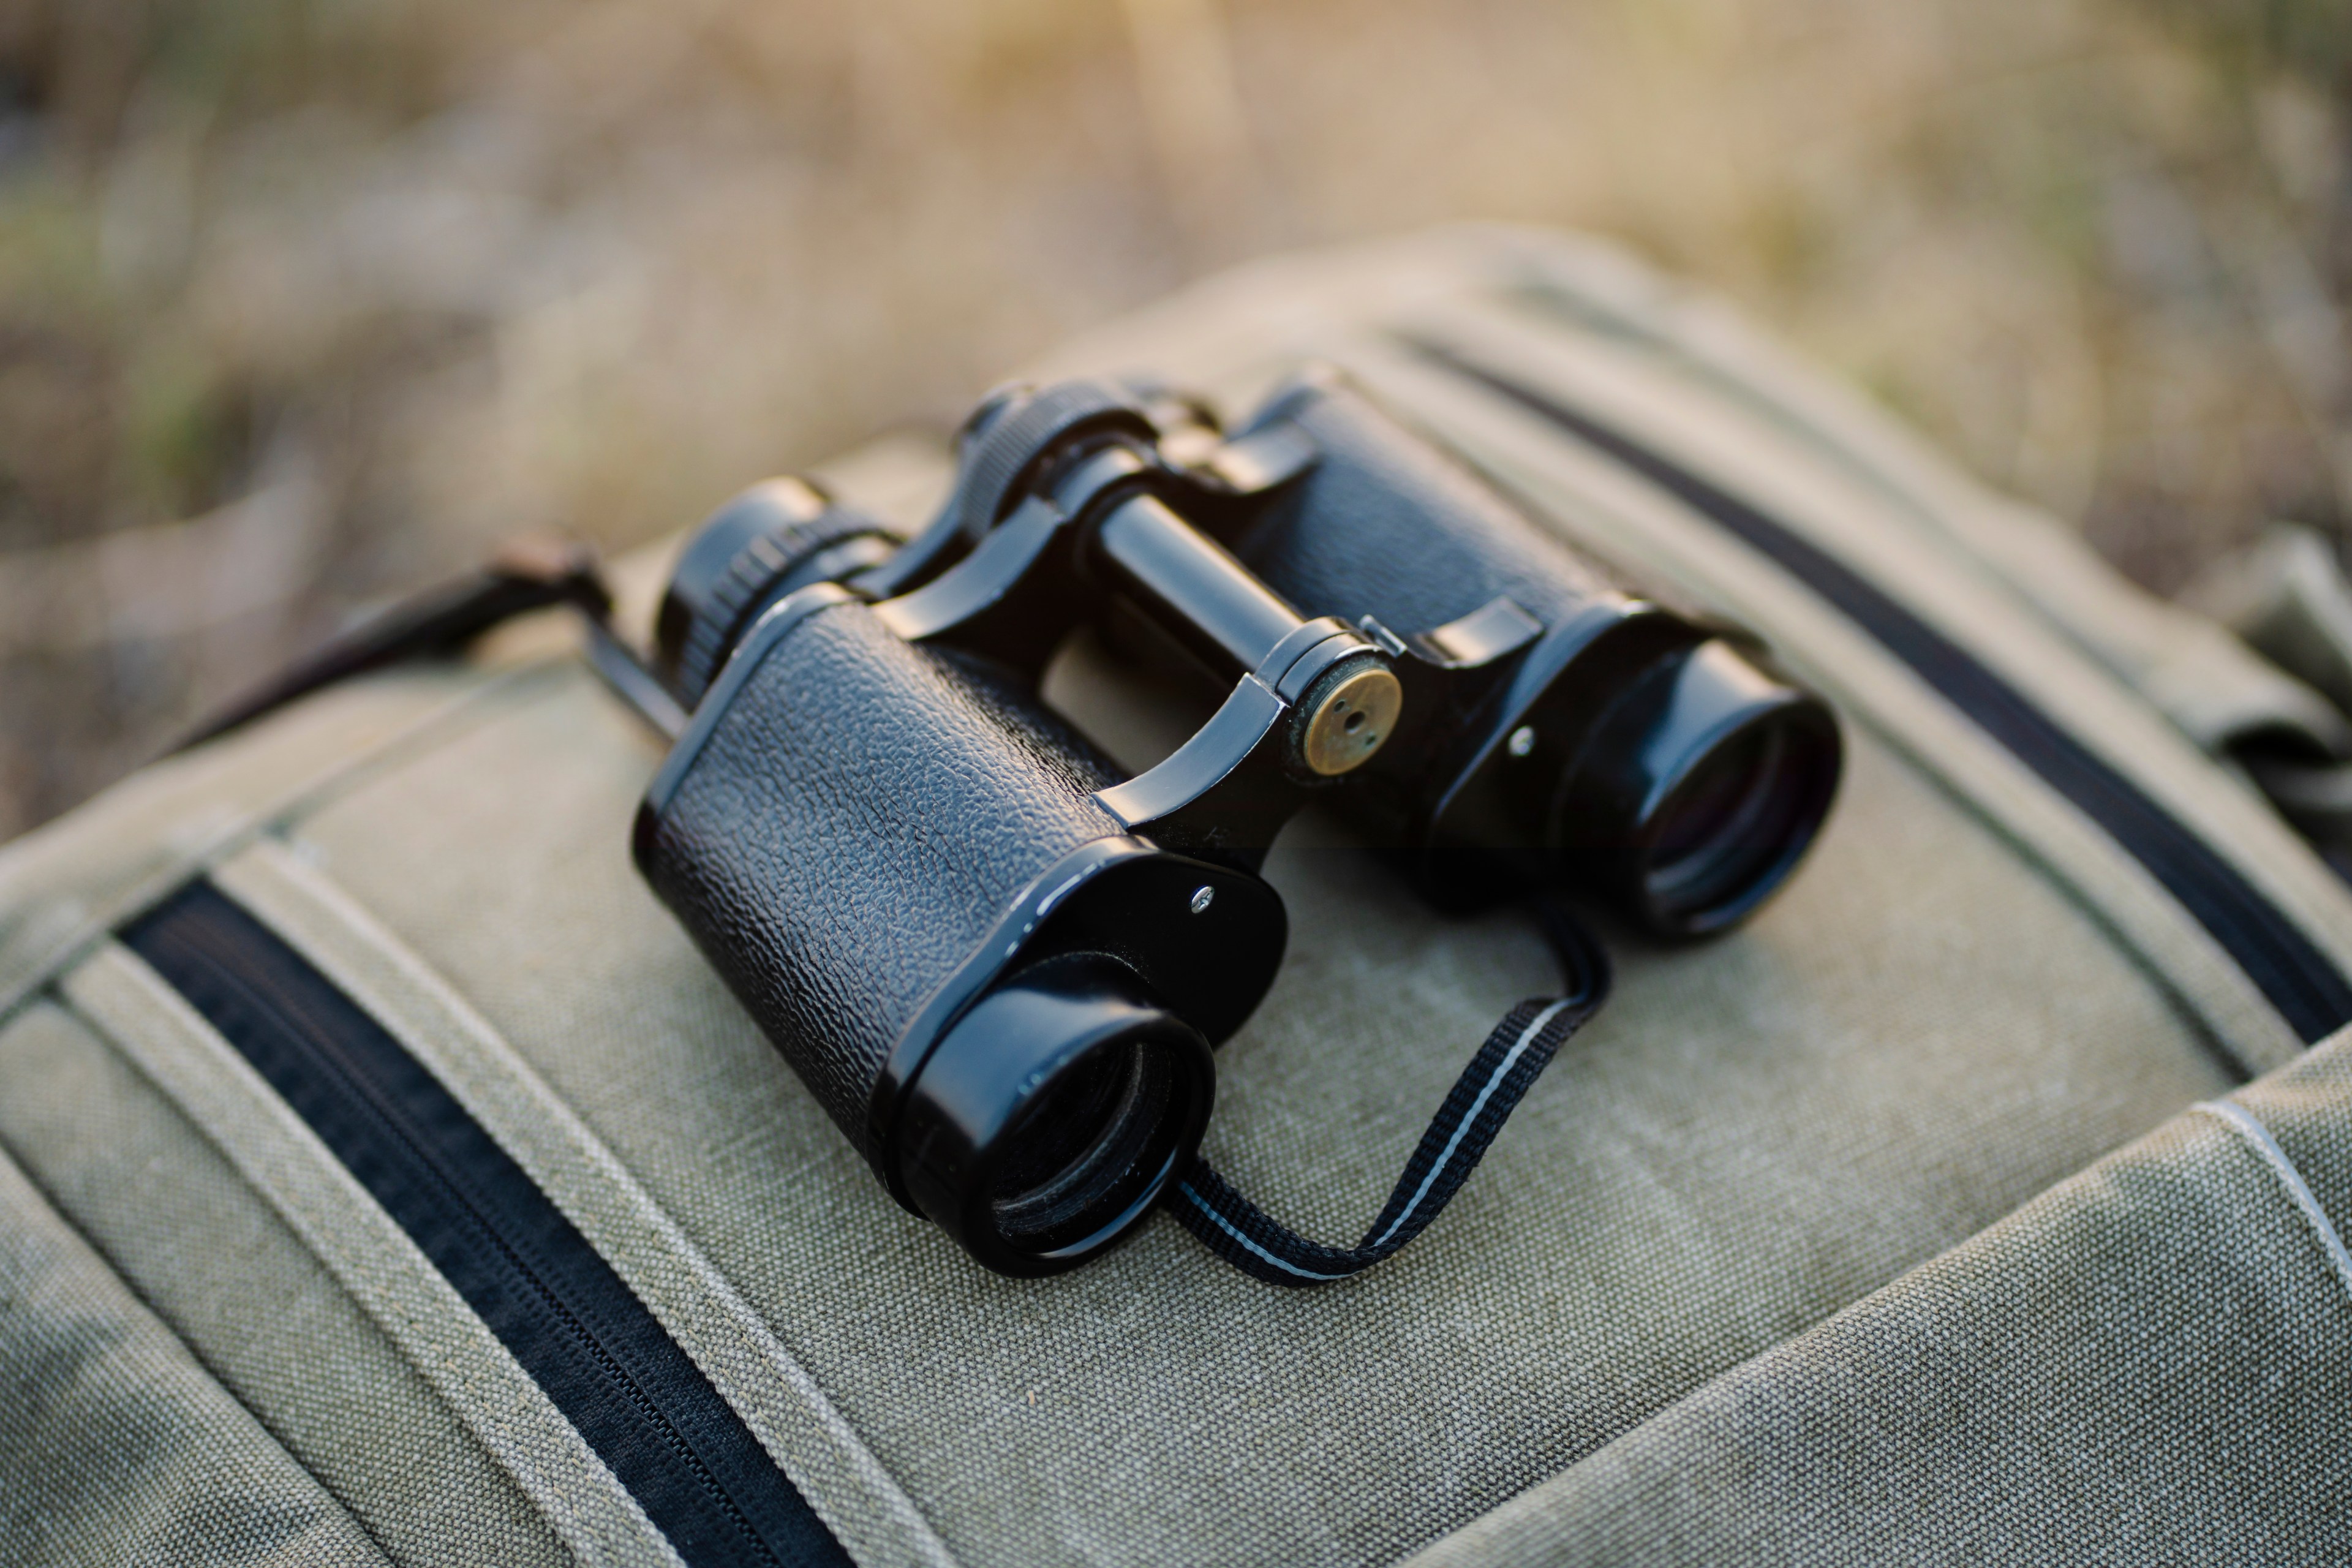 A pair of old binoculars rests on a striped canvas bag in a natural outdoor setting.